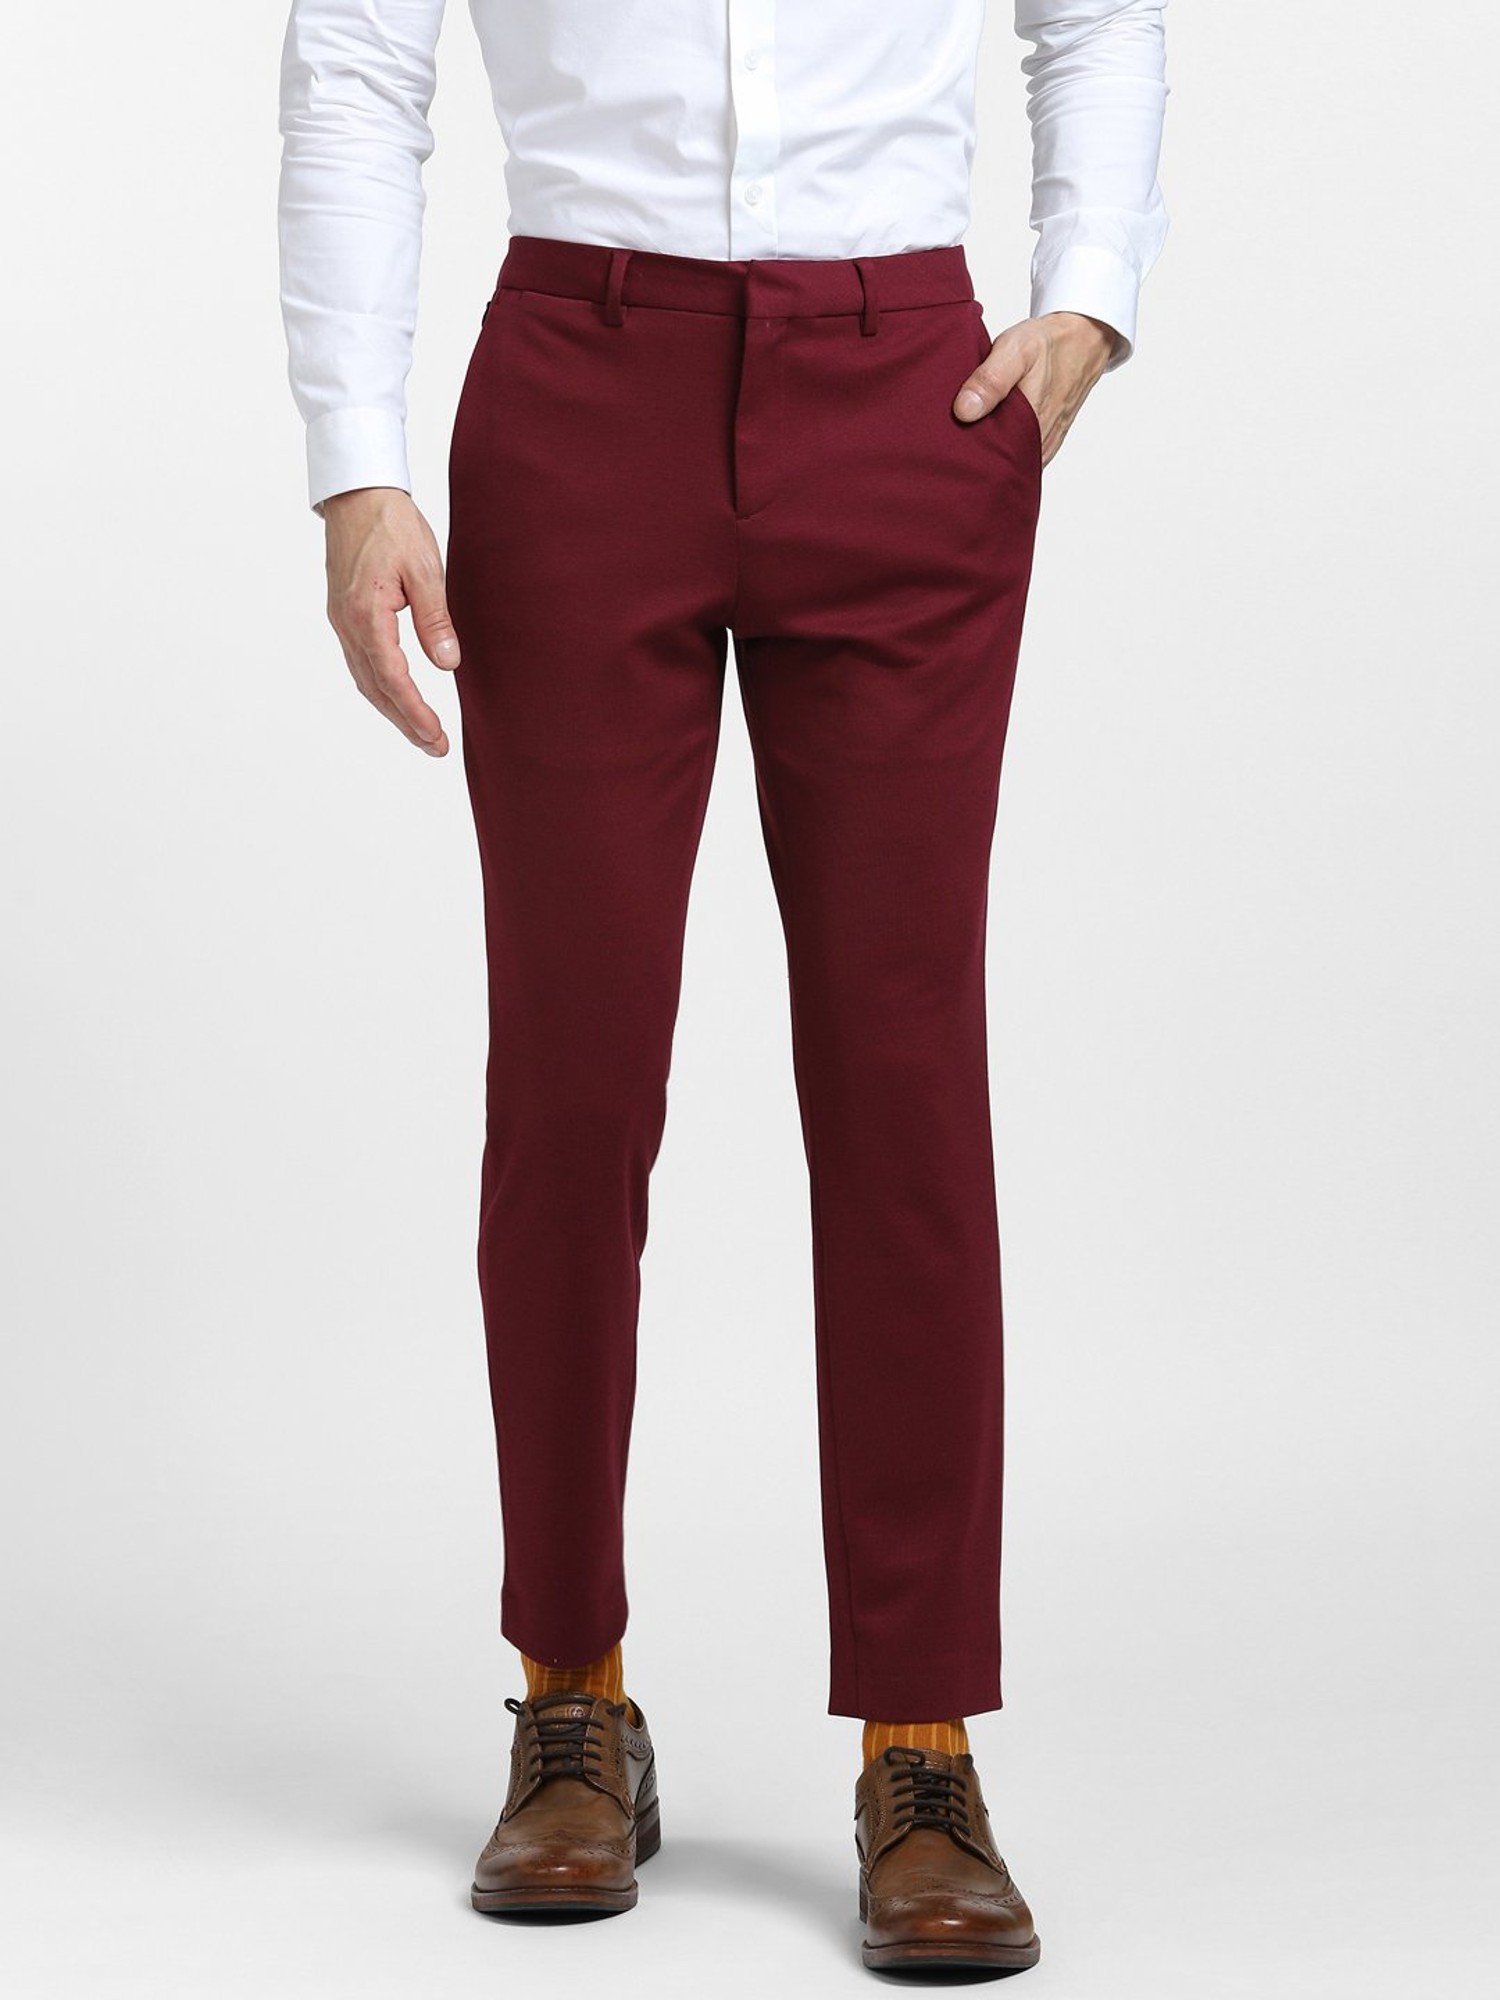 Black polo shirt and maroon pant outfit  Burgundy pants outfit Red pants  outfit Red pants men